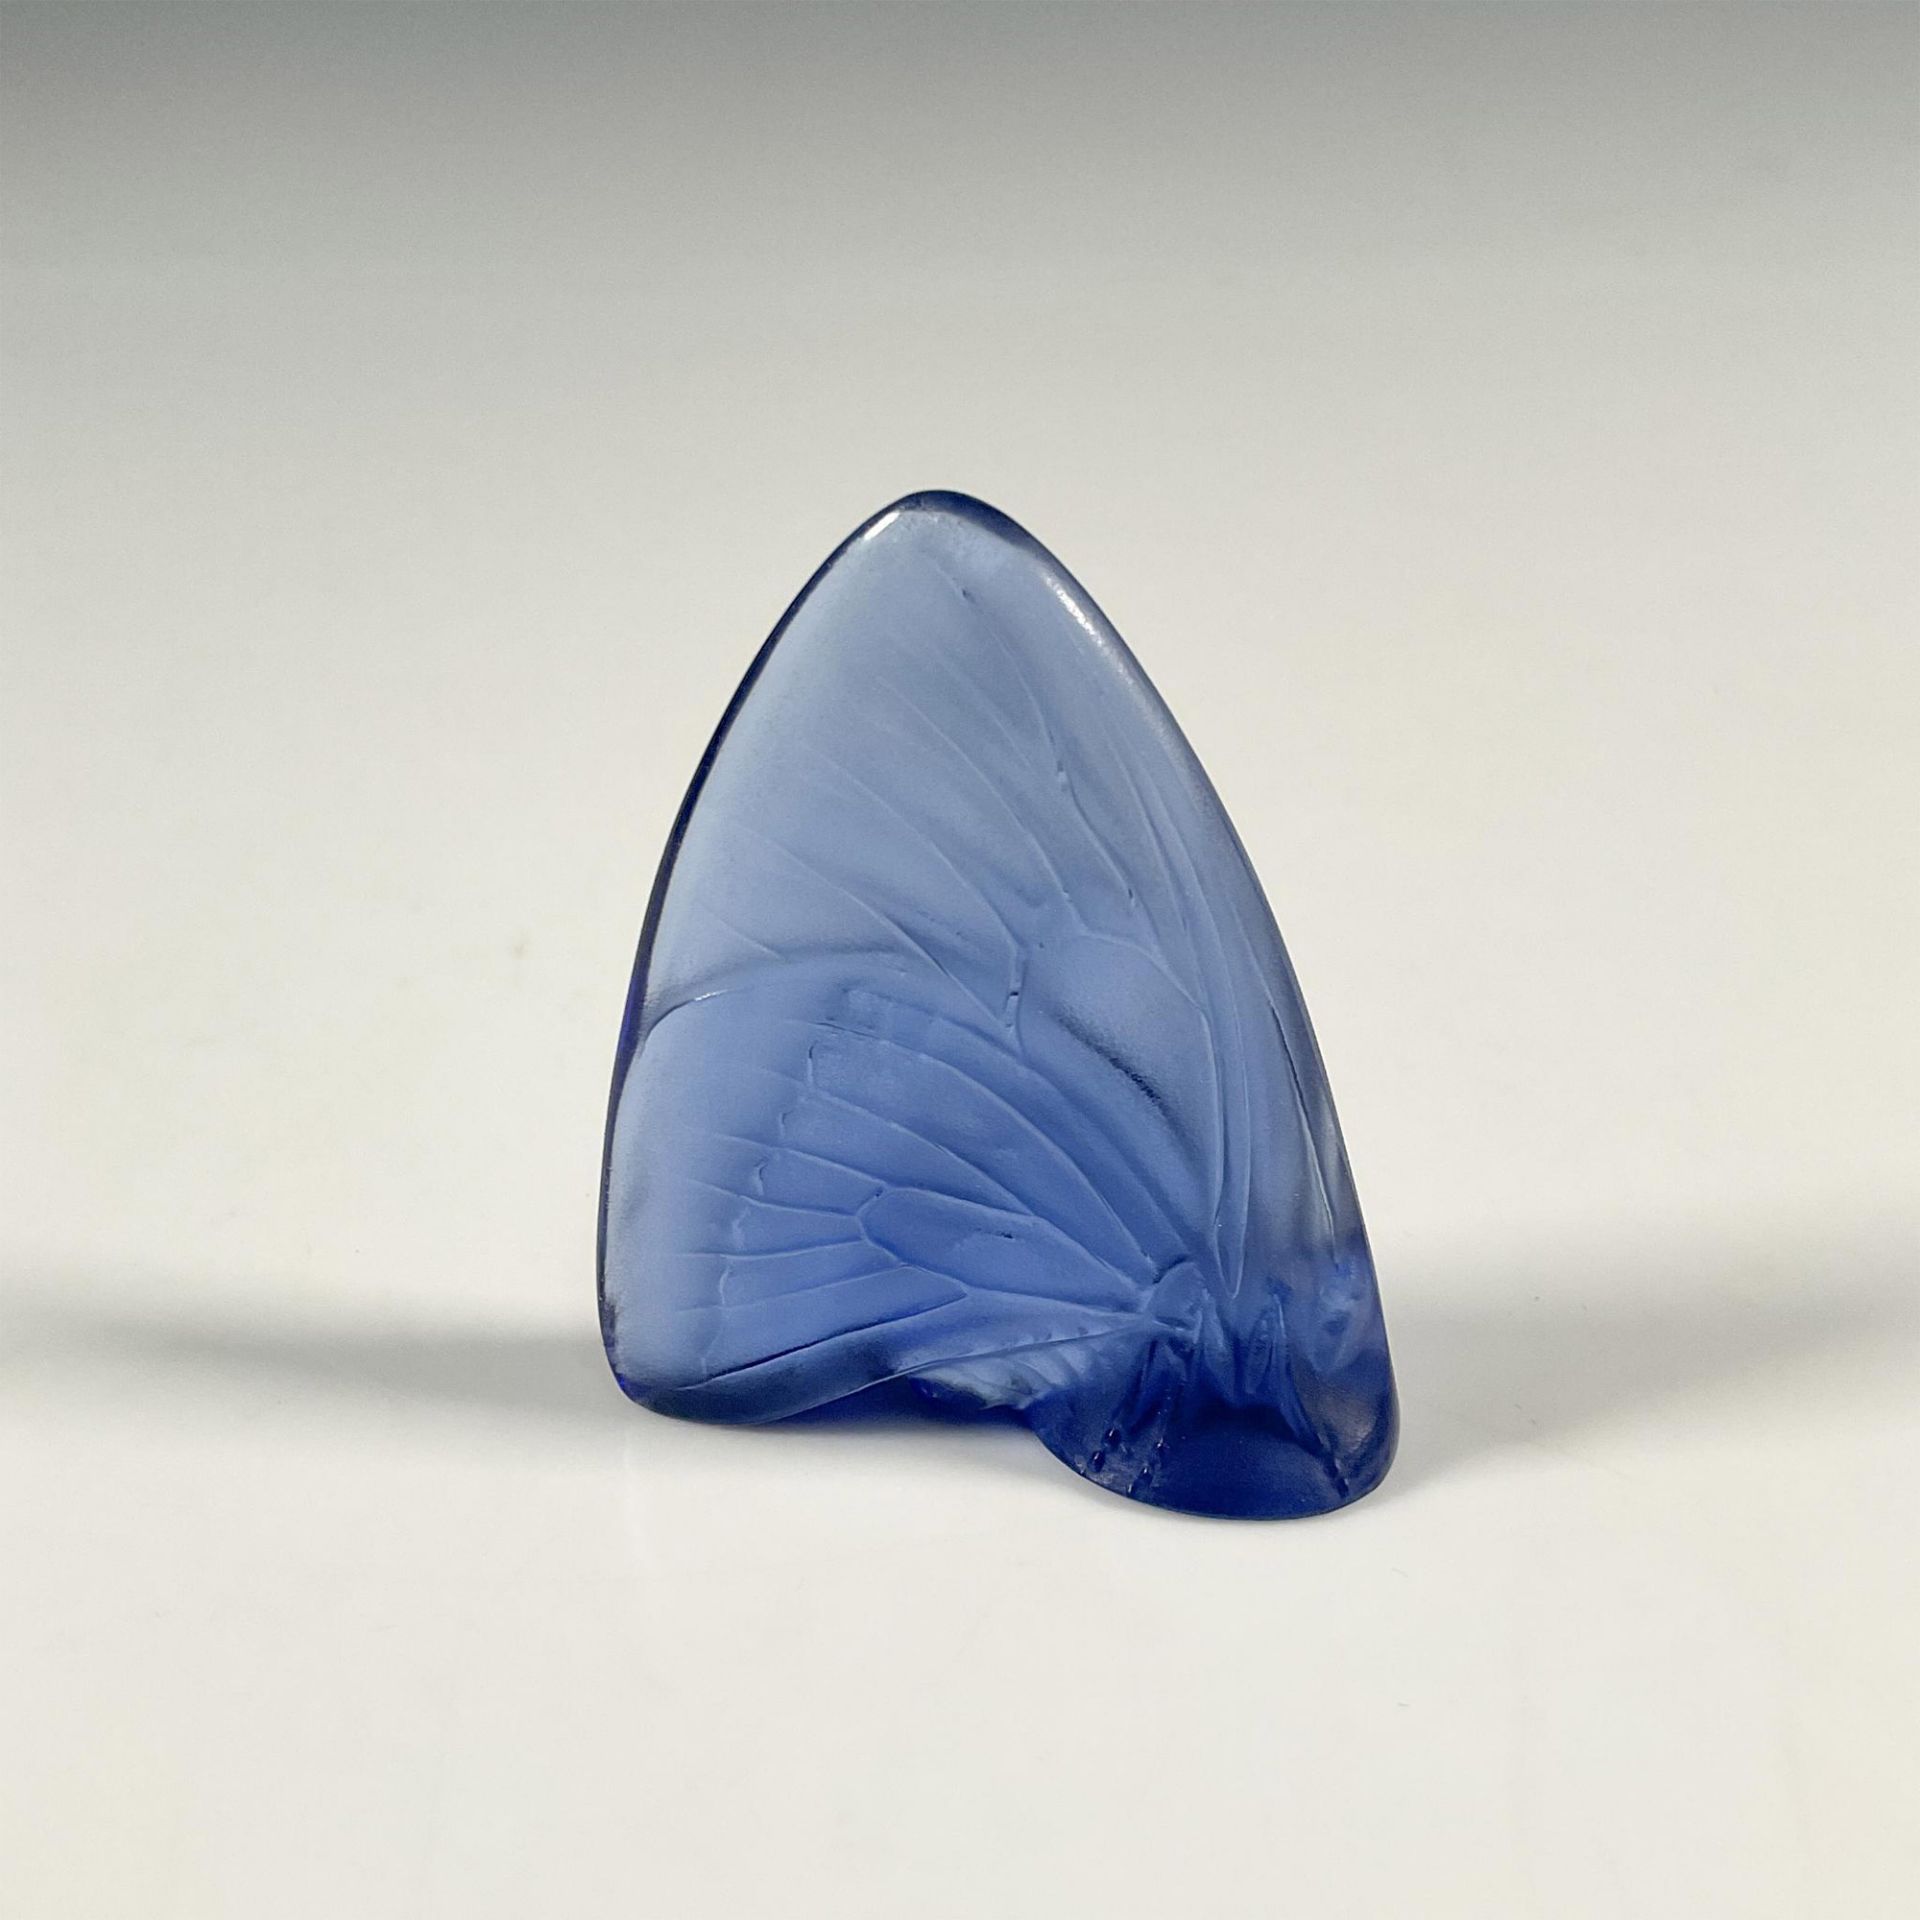 Lalique Crystal Figurine, Blue Butterfly